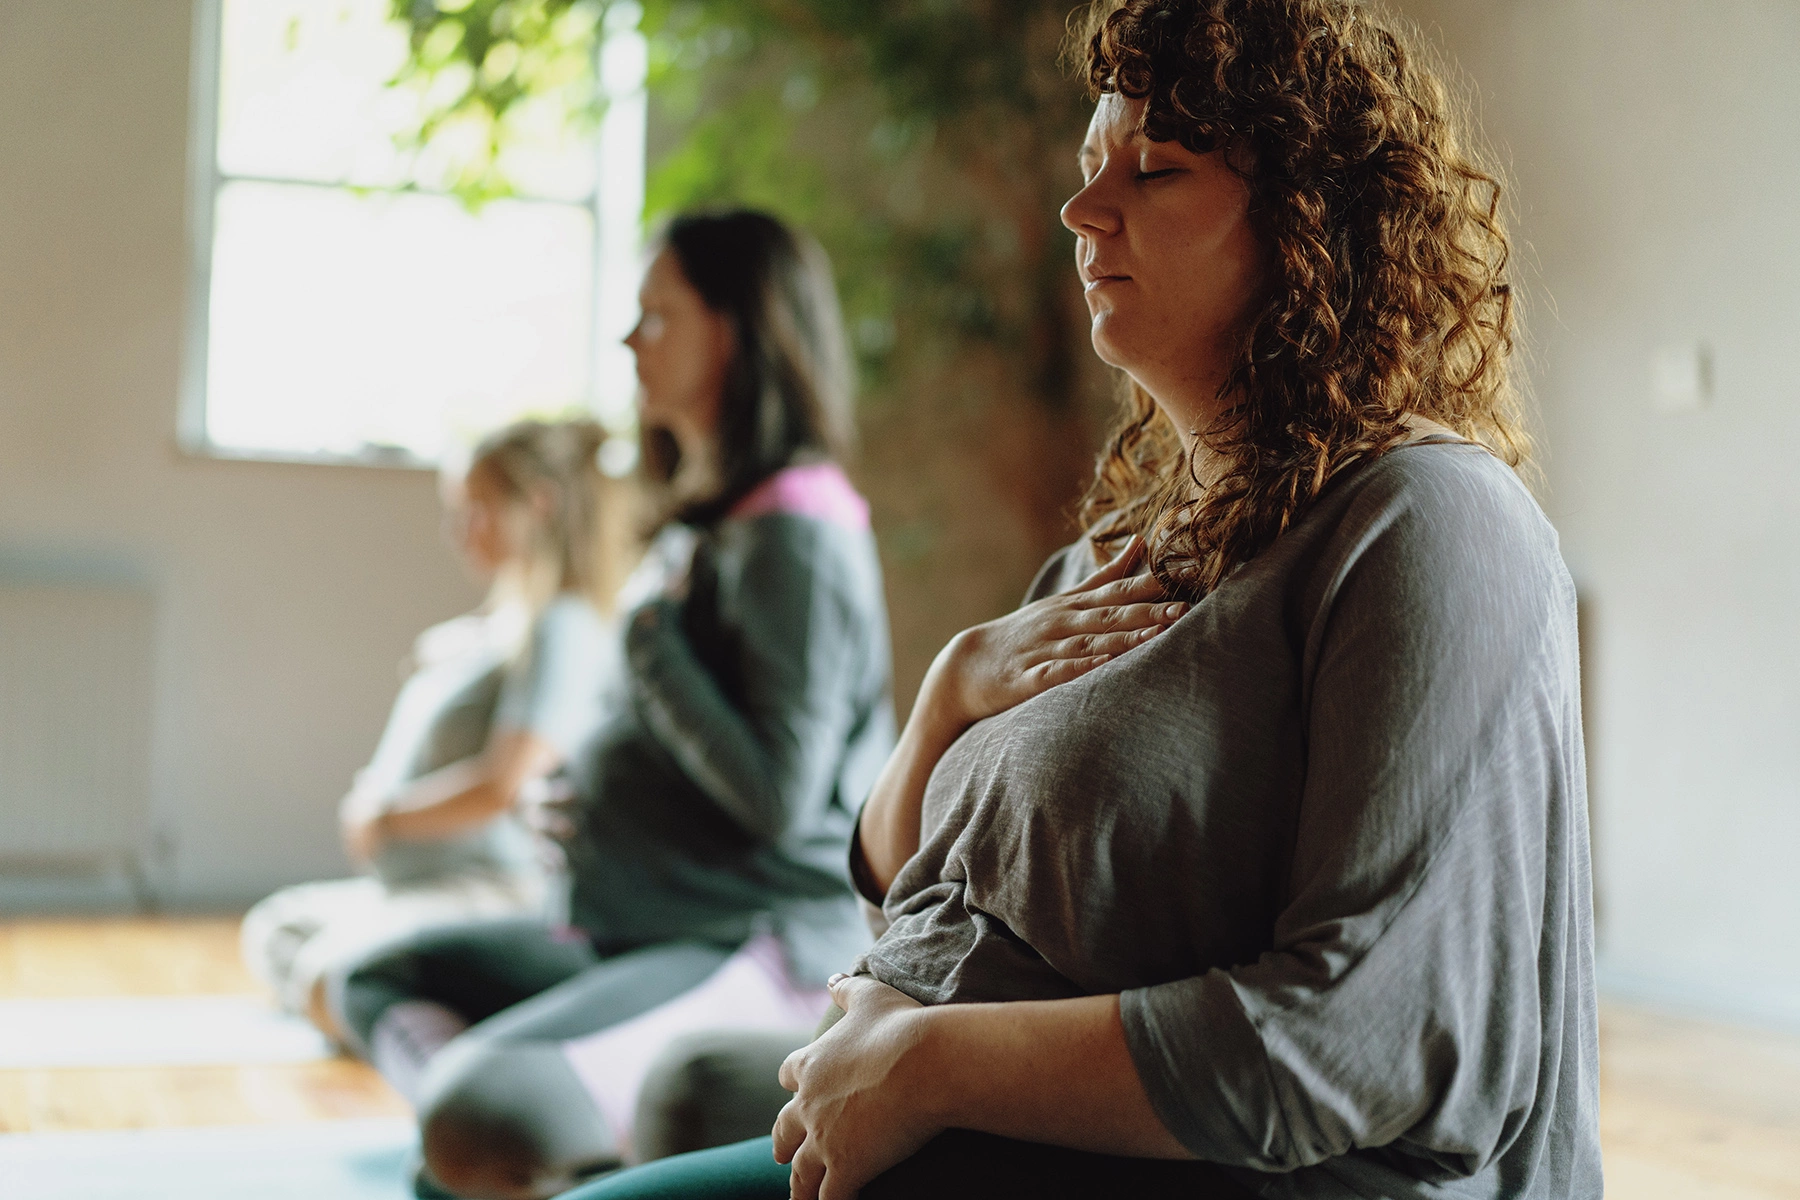 A pregnancy yoga class, the mums are working on their breathing

